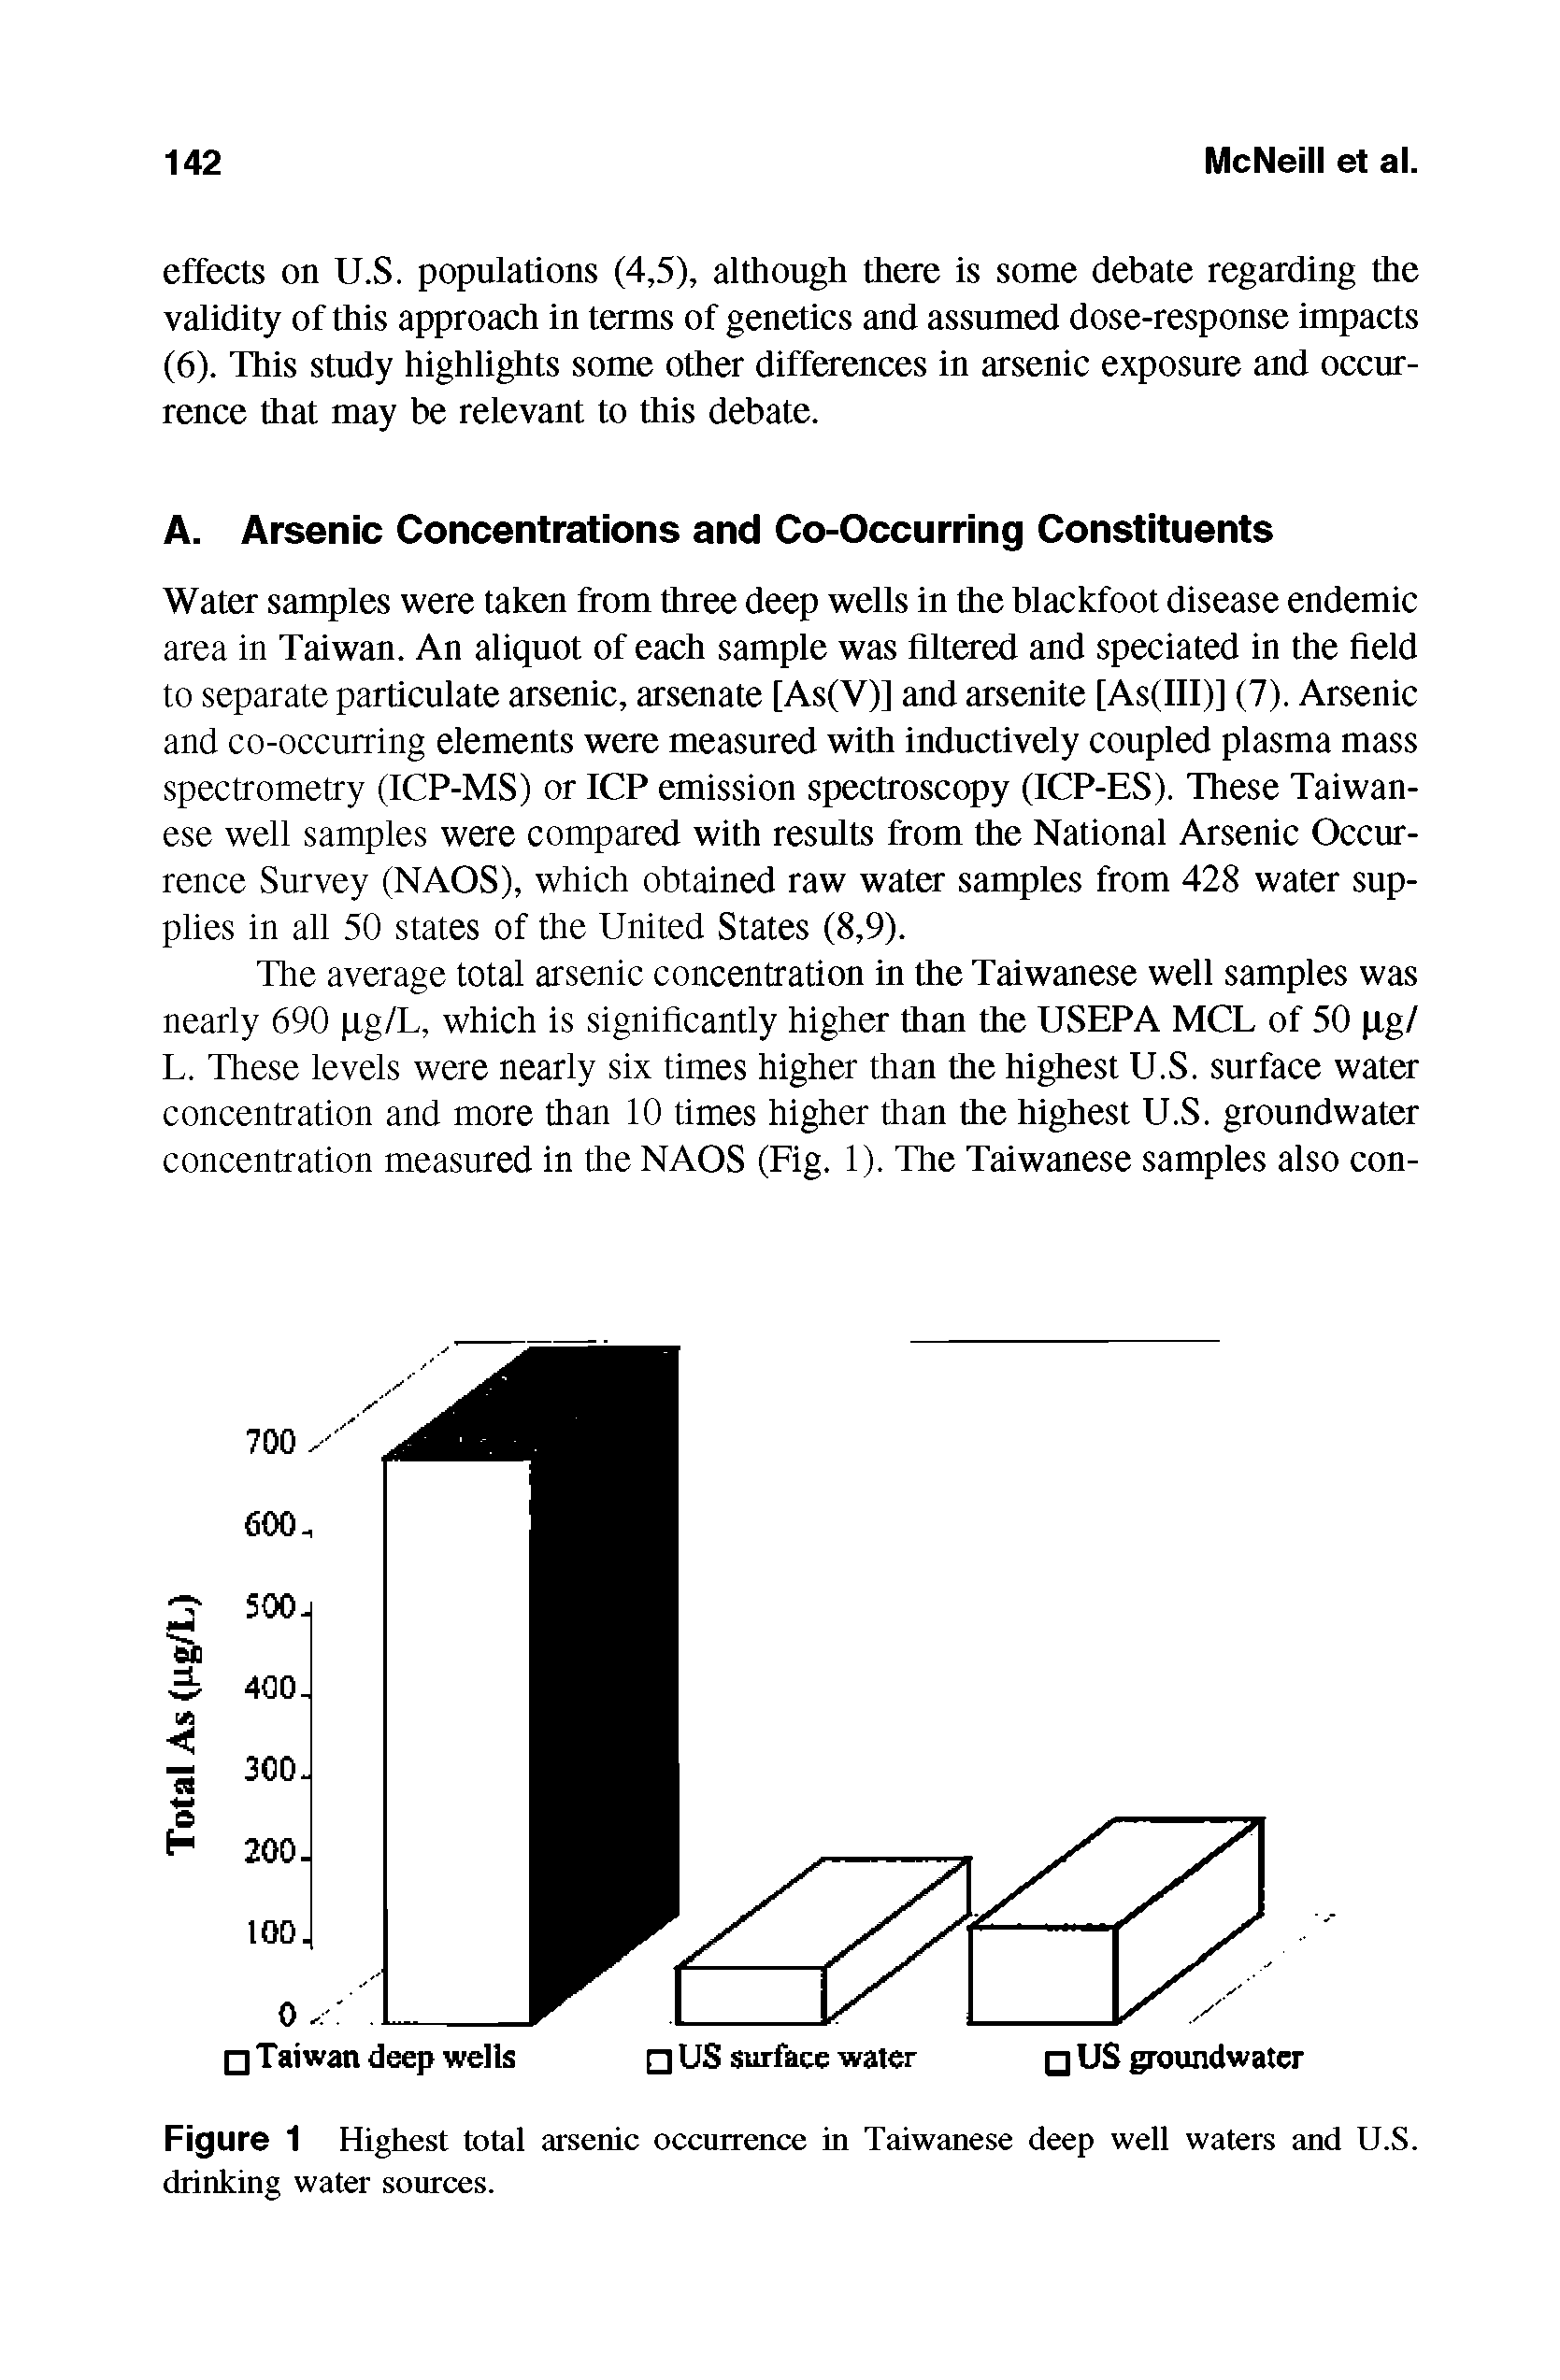 Figure 1 Highest total arsenic occurrence in Taiwanese deep well waters and U.S. drinking water sources.